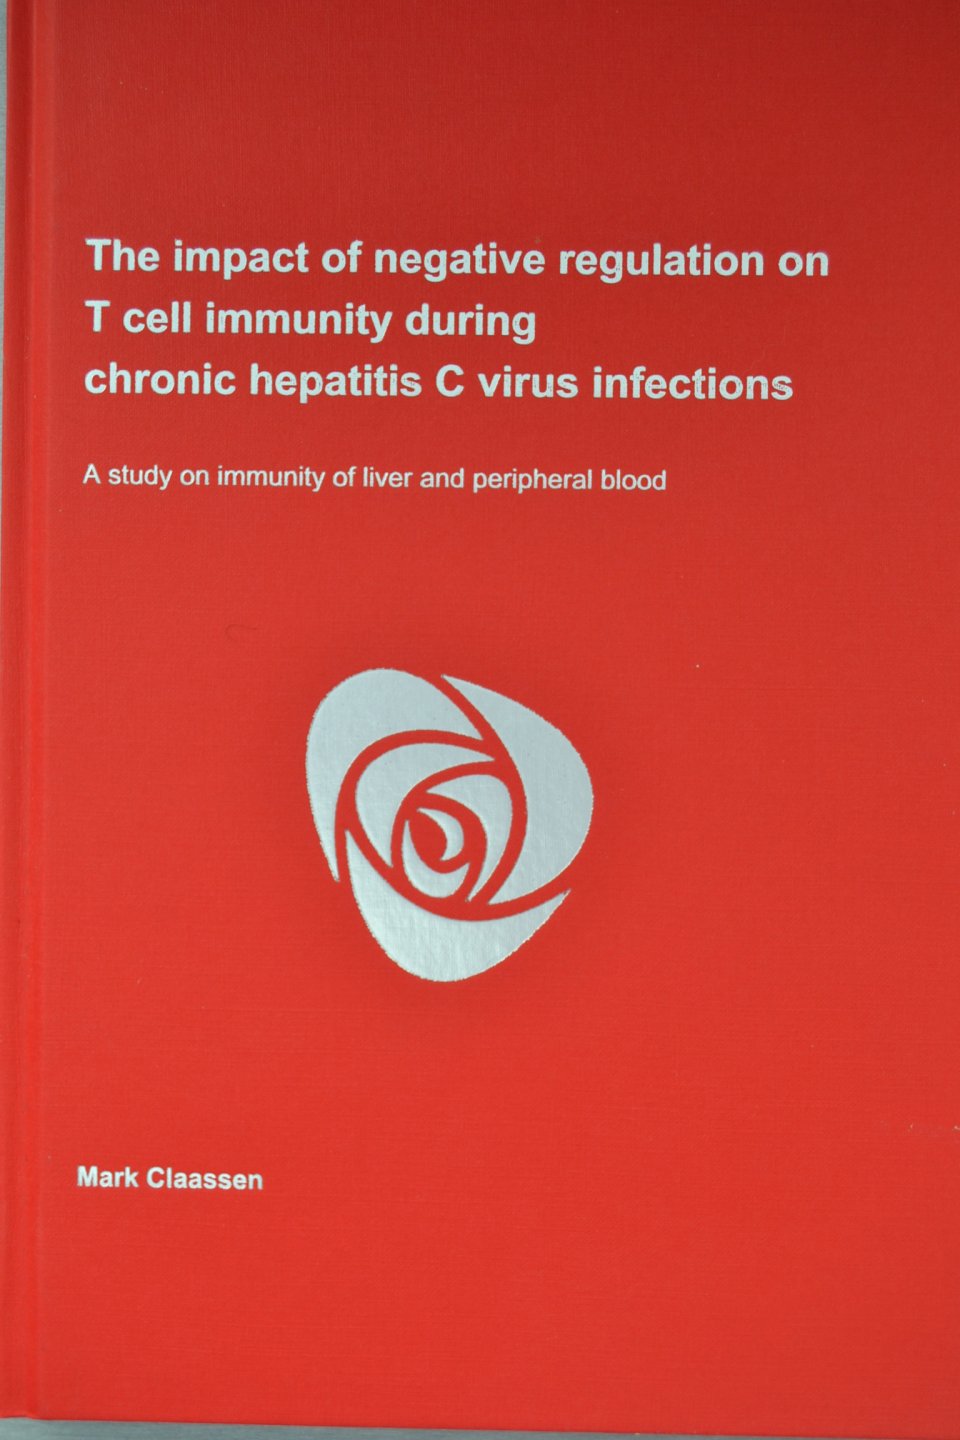 M.A.A. Claassen - The impact of negative regulation on T cell immunity during chronic hepatitis c virus infections. A study on immunity of liver and peripheral blood